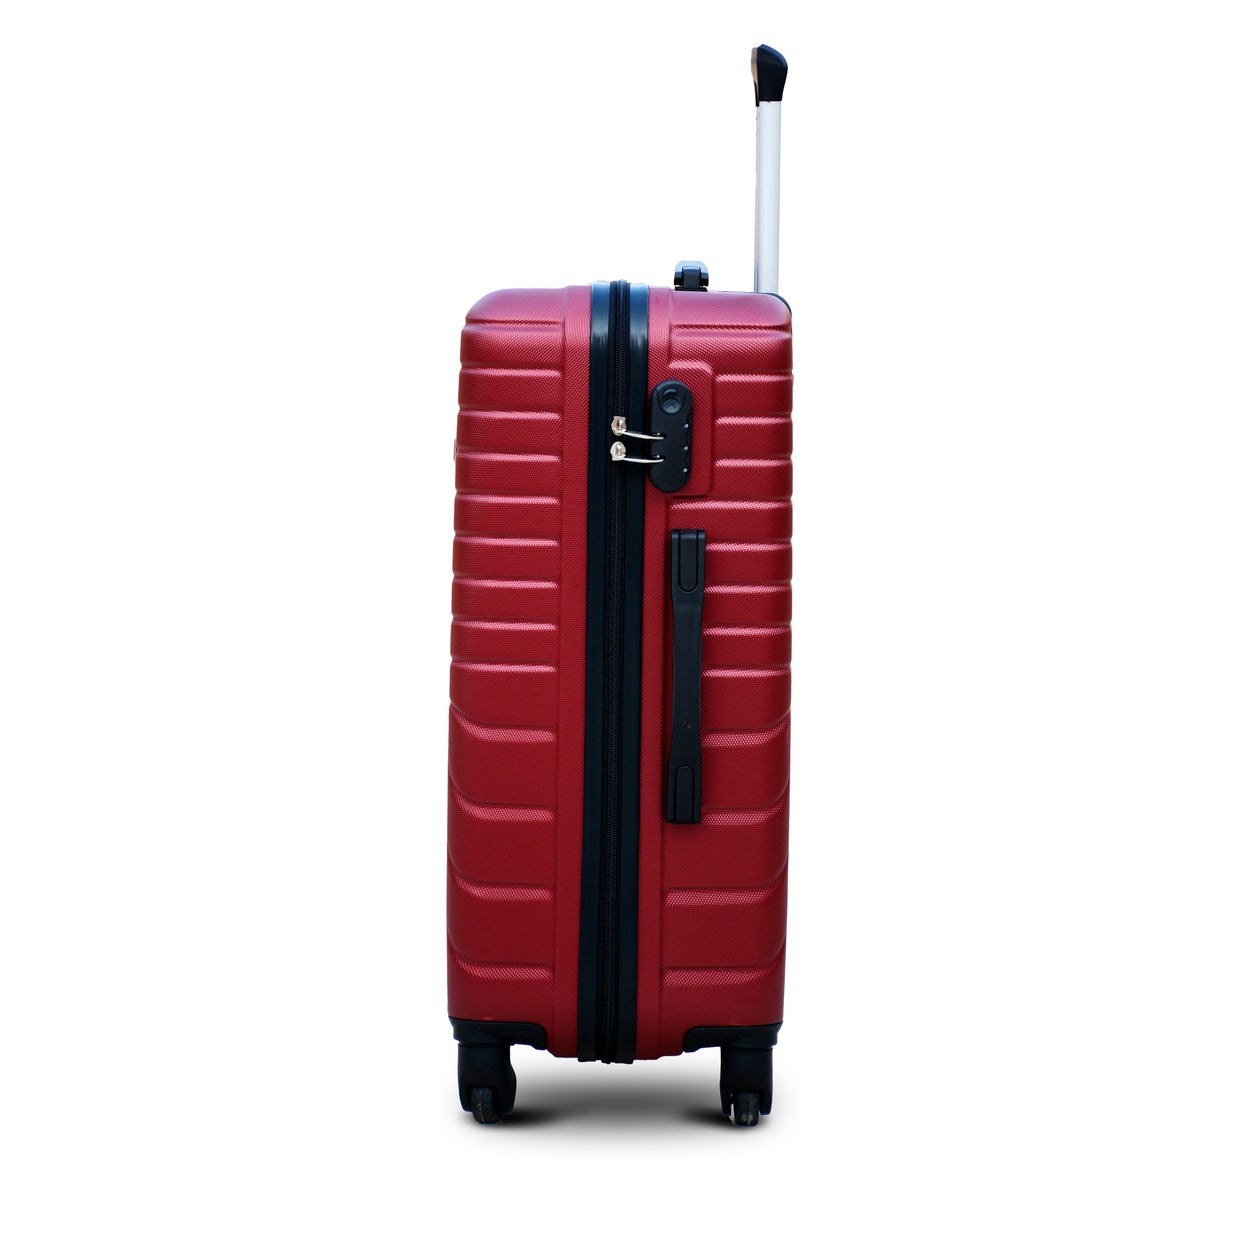 24" Red Colour SJ ABS Luggage Lightweight Hard Case Trolley Bag Zaappy.com